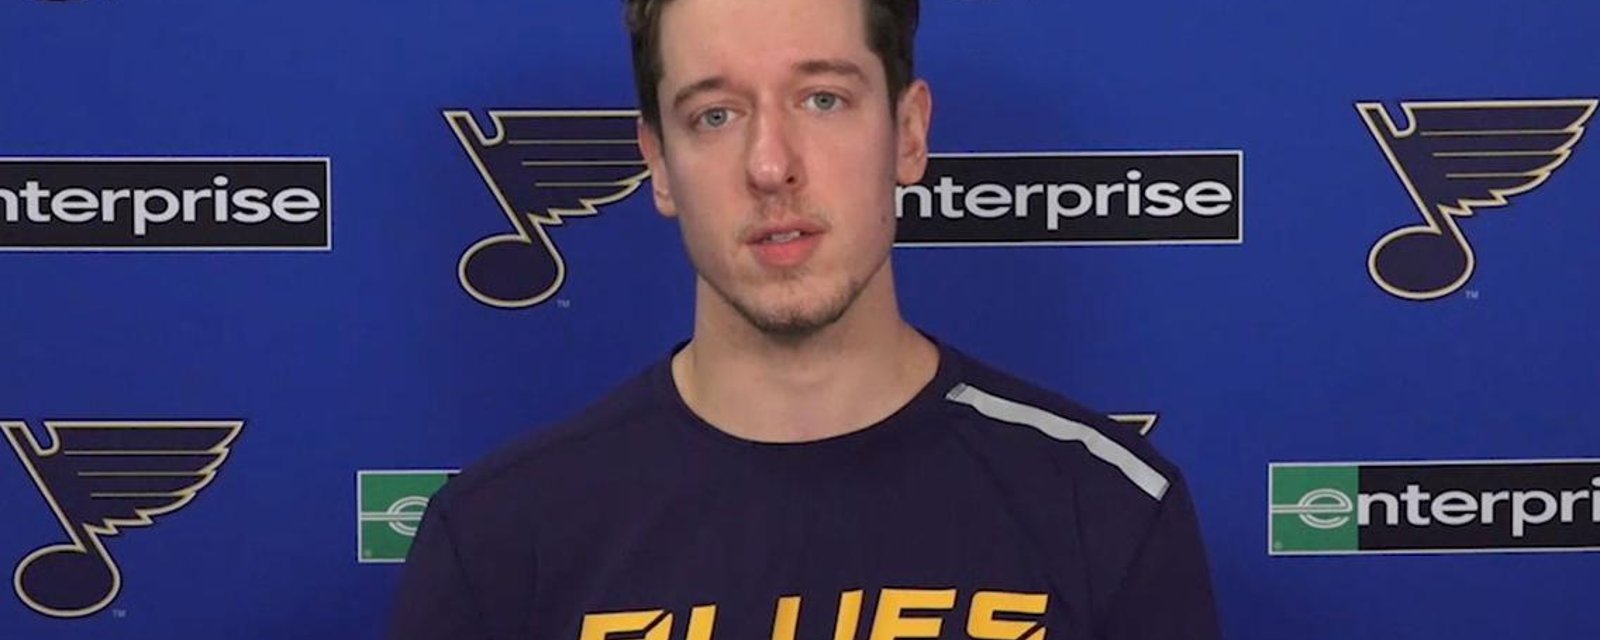 Jordan Binnington reacts to his suspension the only way he knows how!